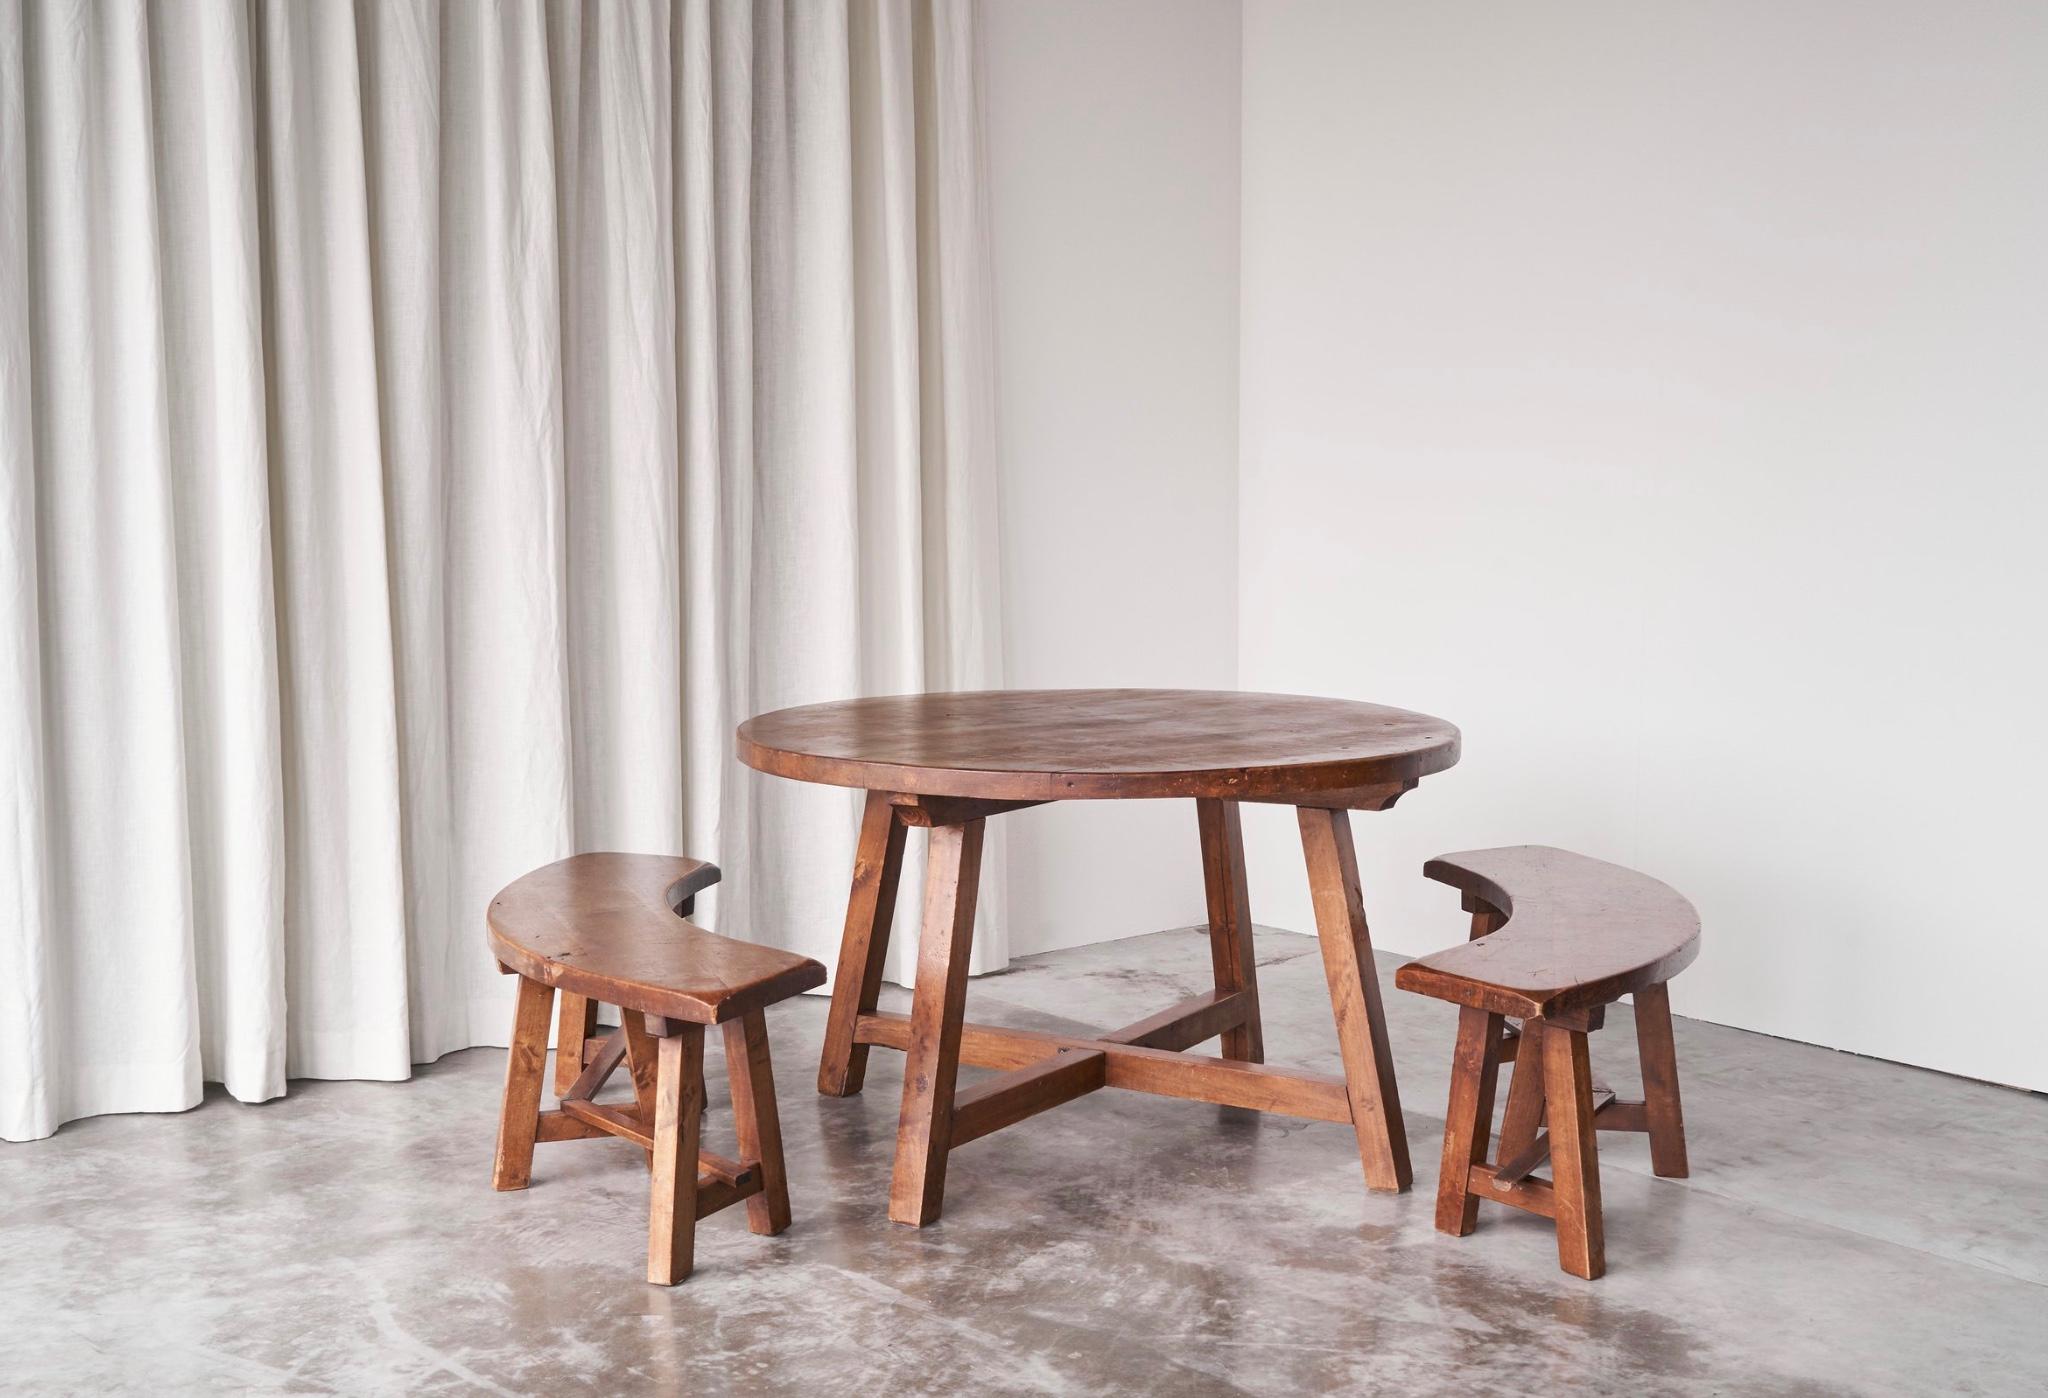 Wonderful Scandinavian Cabinetmaker Rustic Set of Table and Benches in Solid Pine, 1940s.

The characteristic artisan farmhouse set is from Scandinavia, 1940s. It is a round table and two matching benches, crafted in solid Pine wood. The